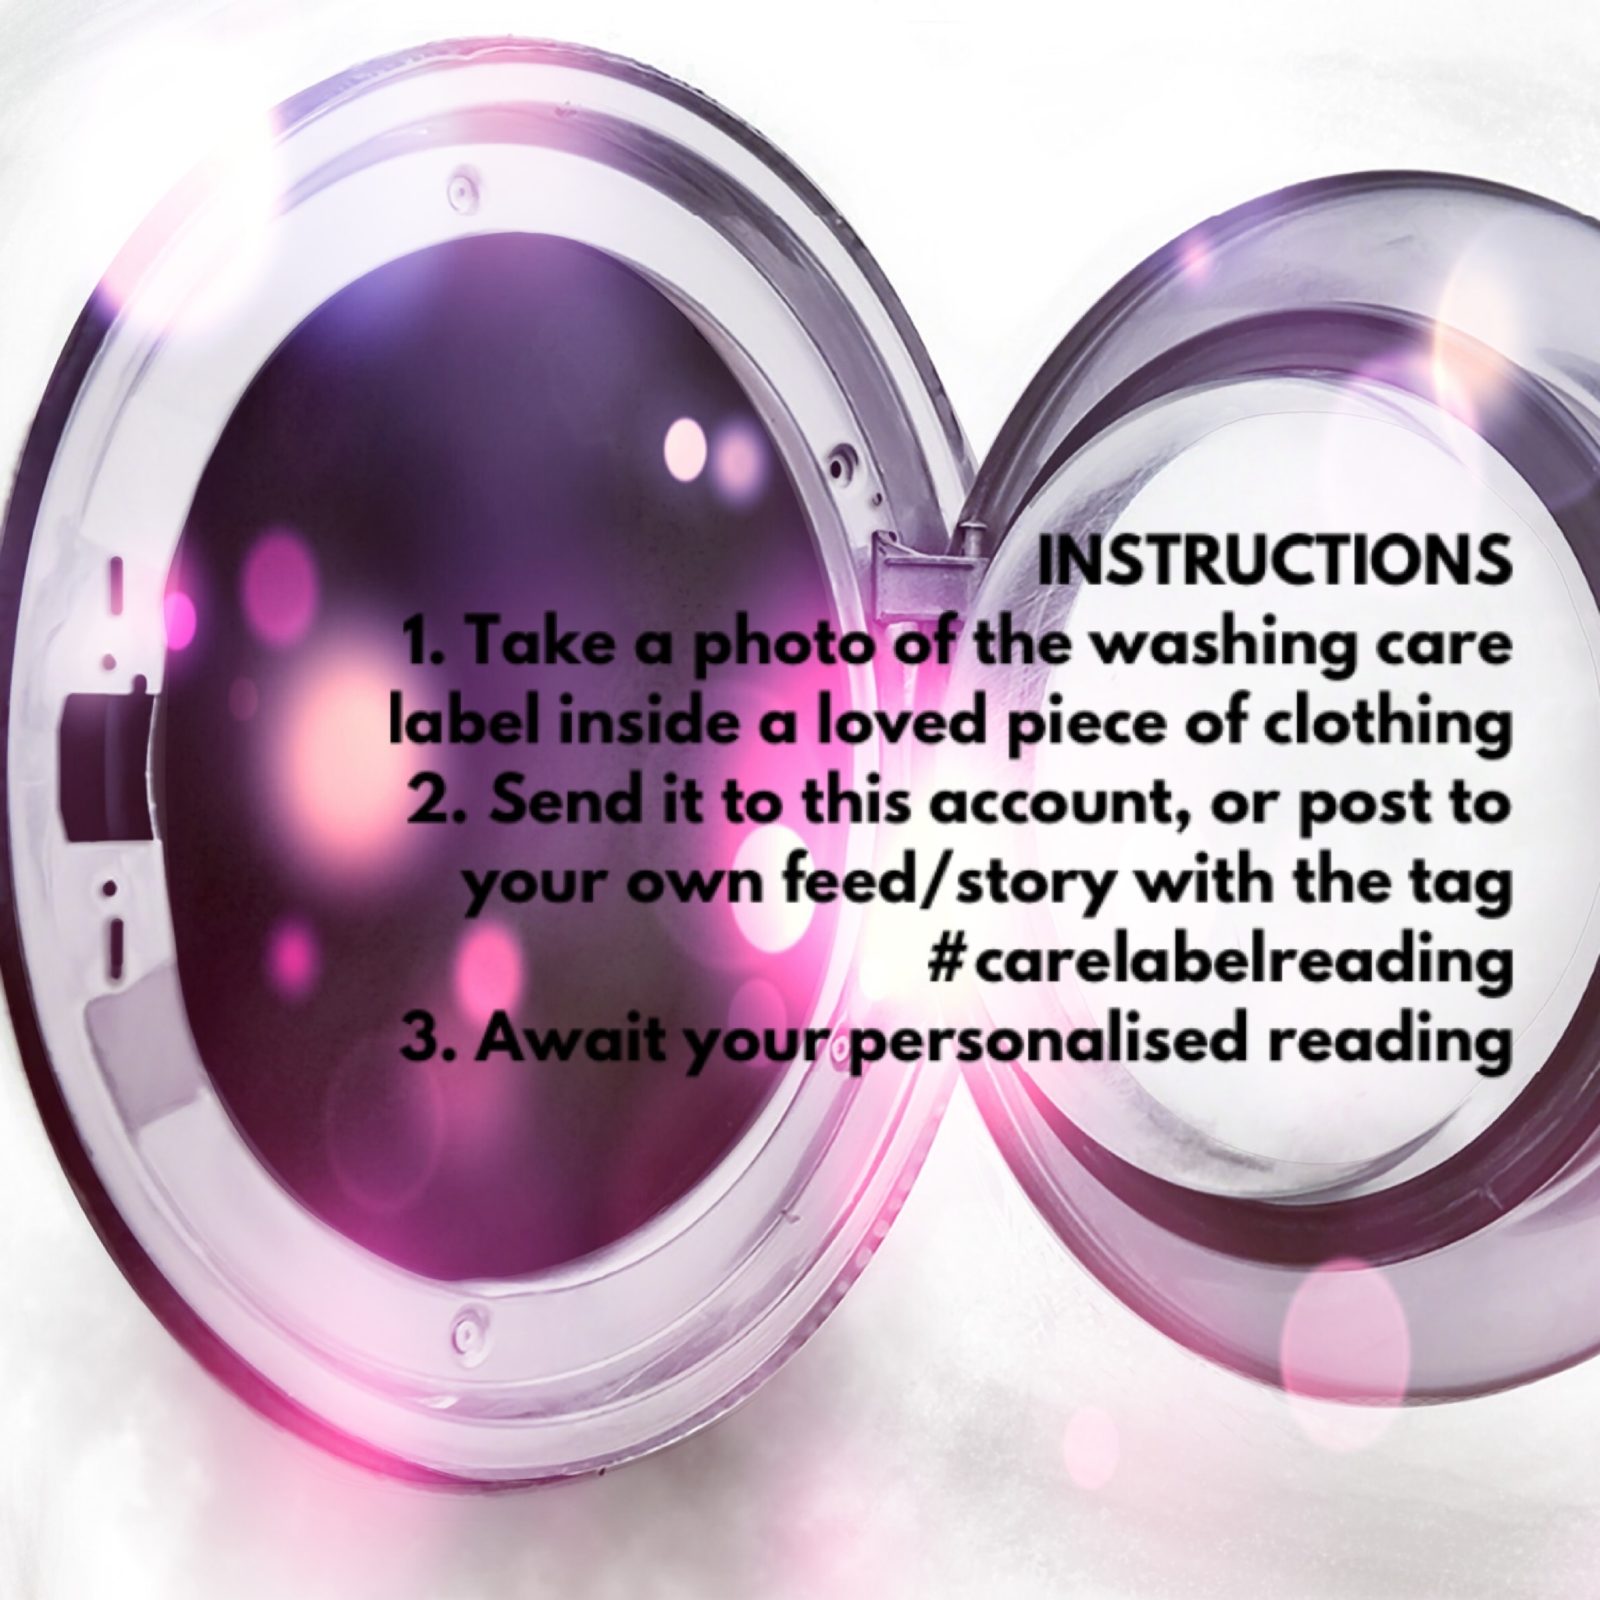 Photograph of a washing machine that is abstracted with a pink sparkly overlay. There is black text reading 'INSTRUCTIONS 1. Take a photo of the washing care label inside a loved piece of clothing 2. Send it to this account, or post to your own feed/story with the tag #carelabelreading 3. Await your personalised reading' on the image.